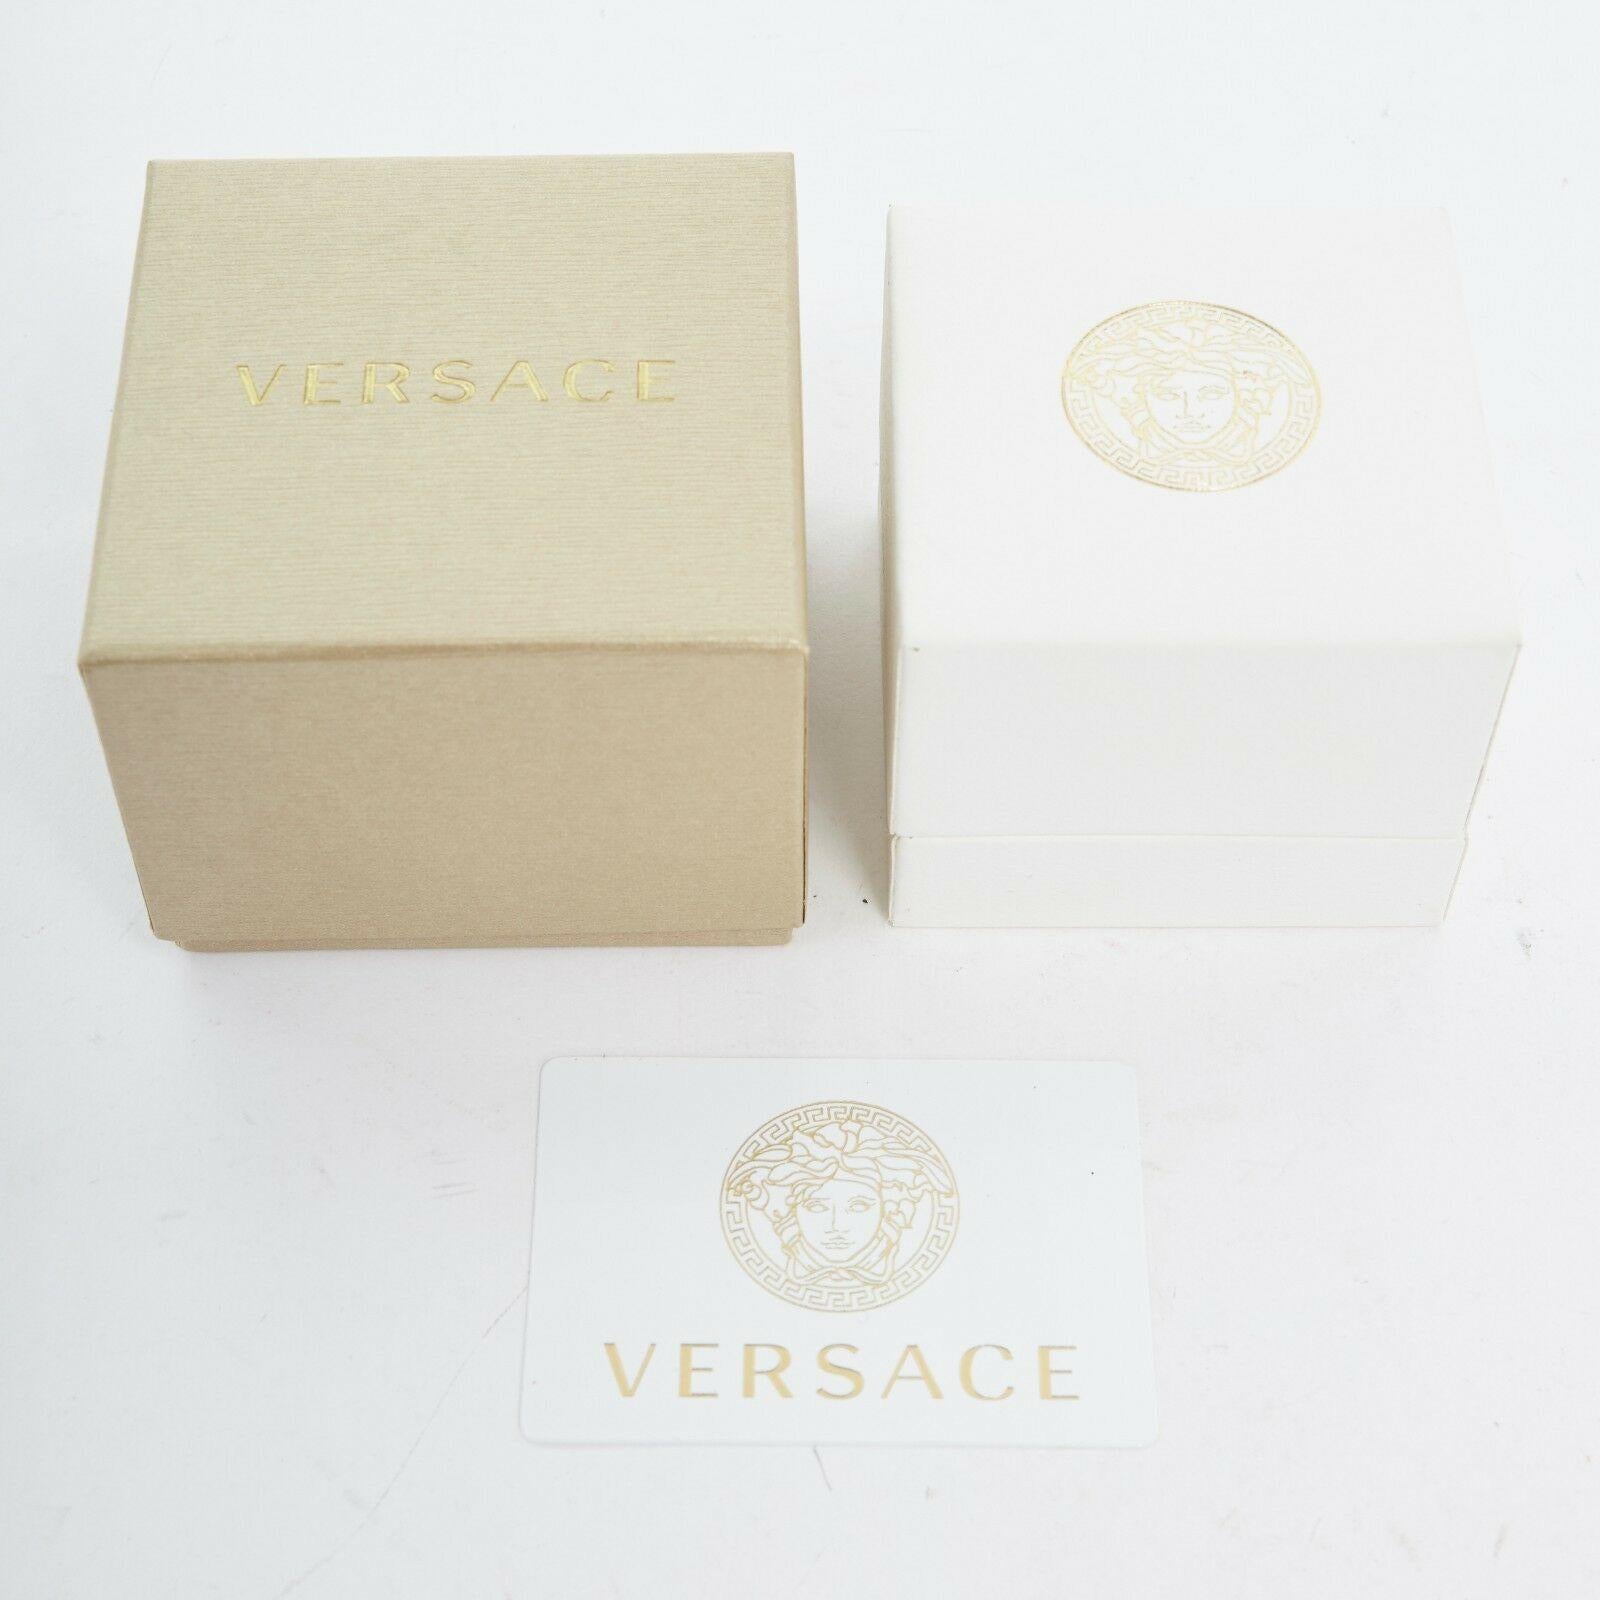 new VERSACE Palazzo Medusa snake head gold plated large cocktail ring 8.75 1